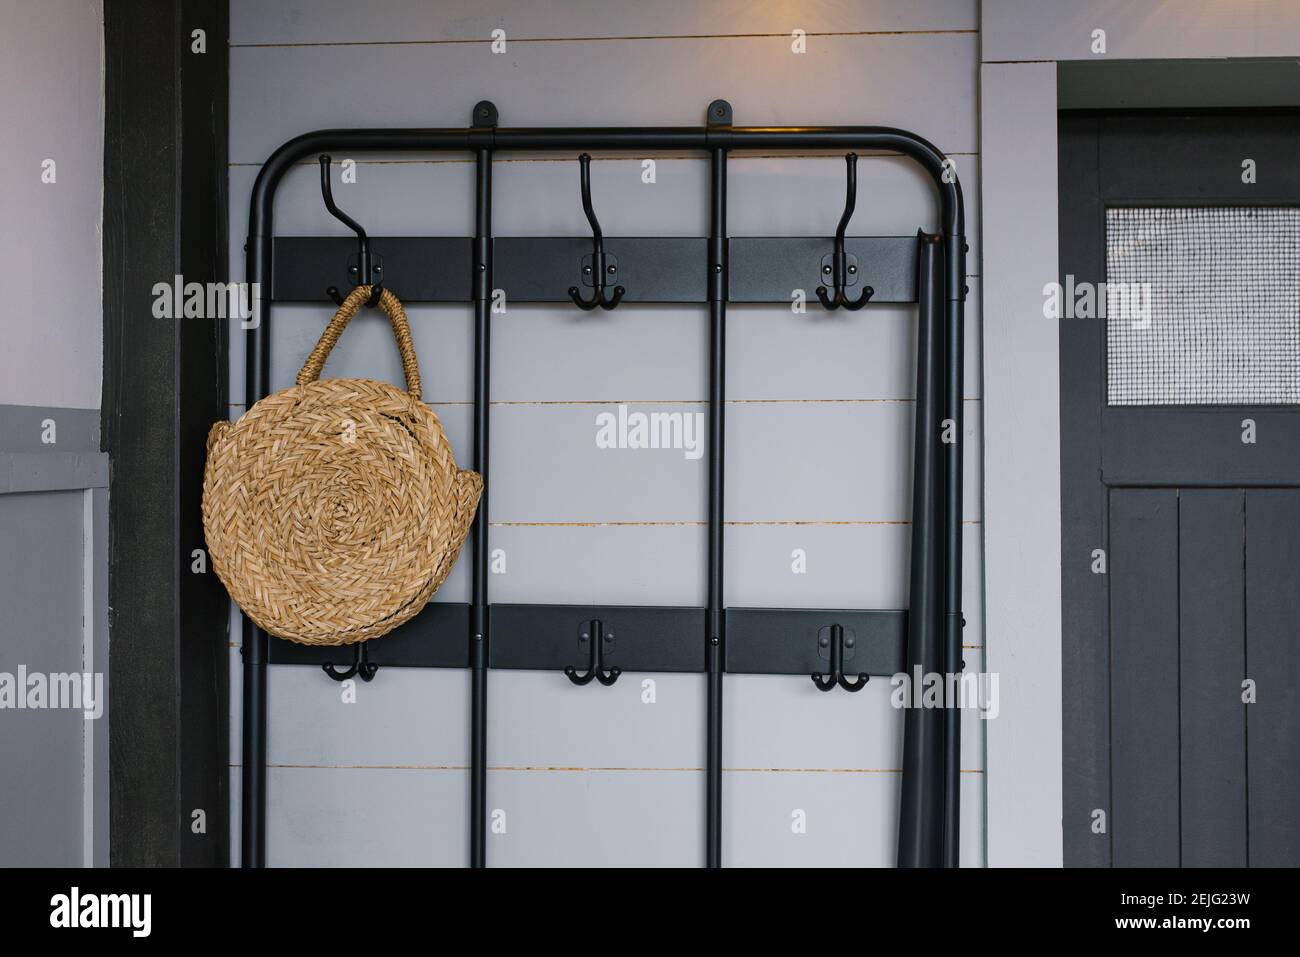 A wicker bag hangs on a hanger near the front door in the interior of a Scandinavian house Stock Photo